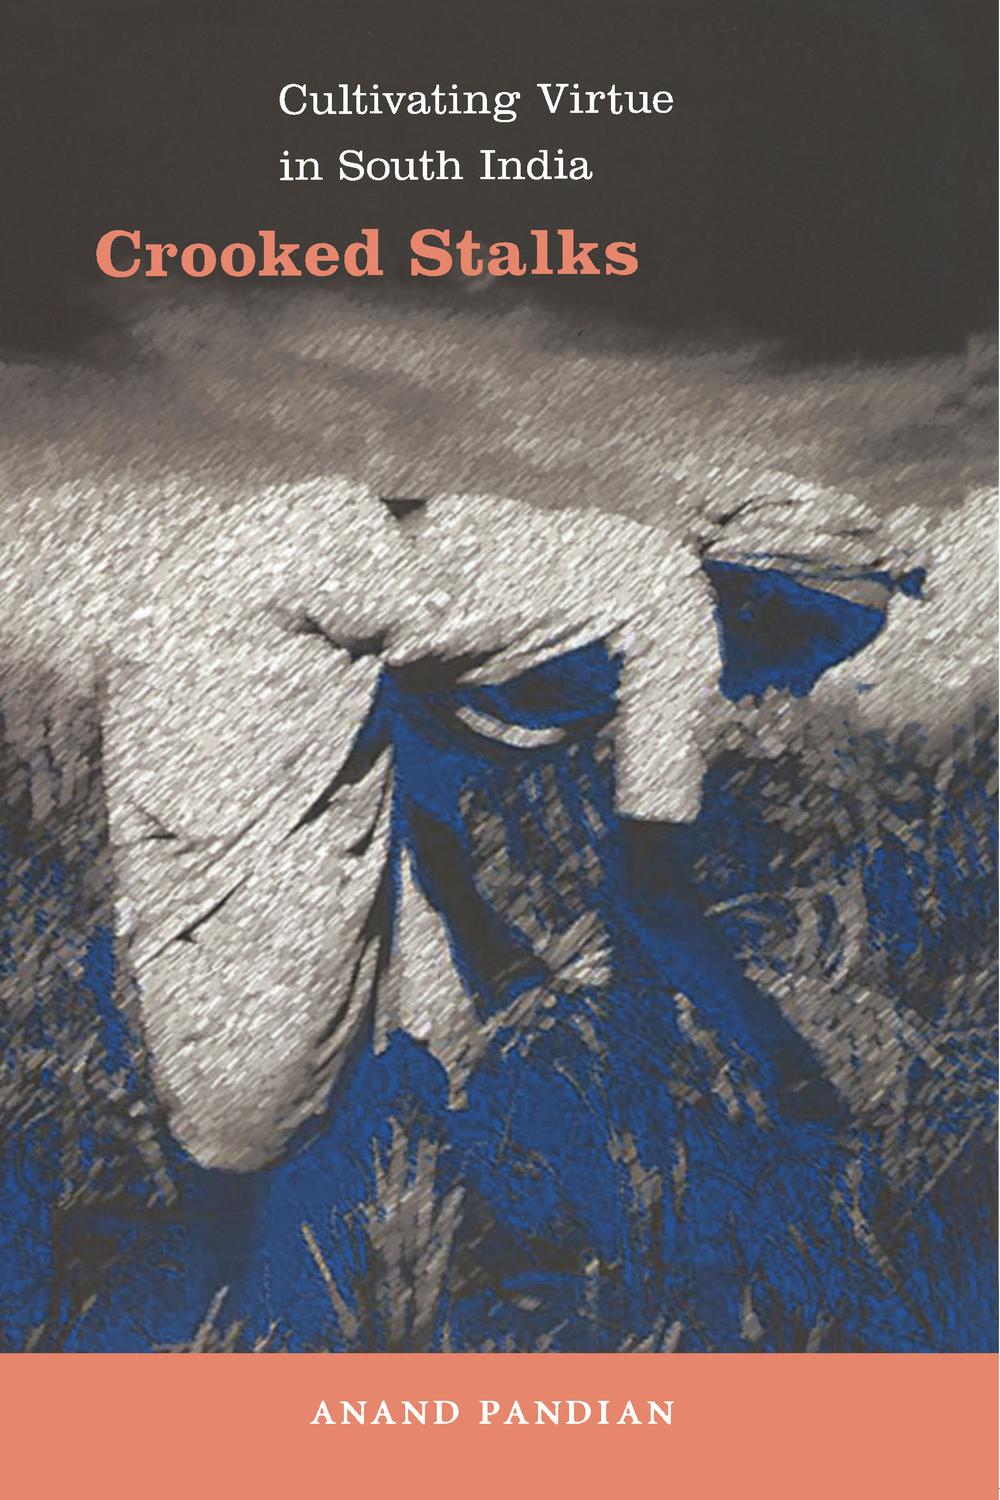 Crooked Stalks - Anand Pandian